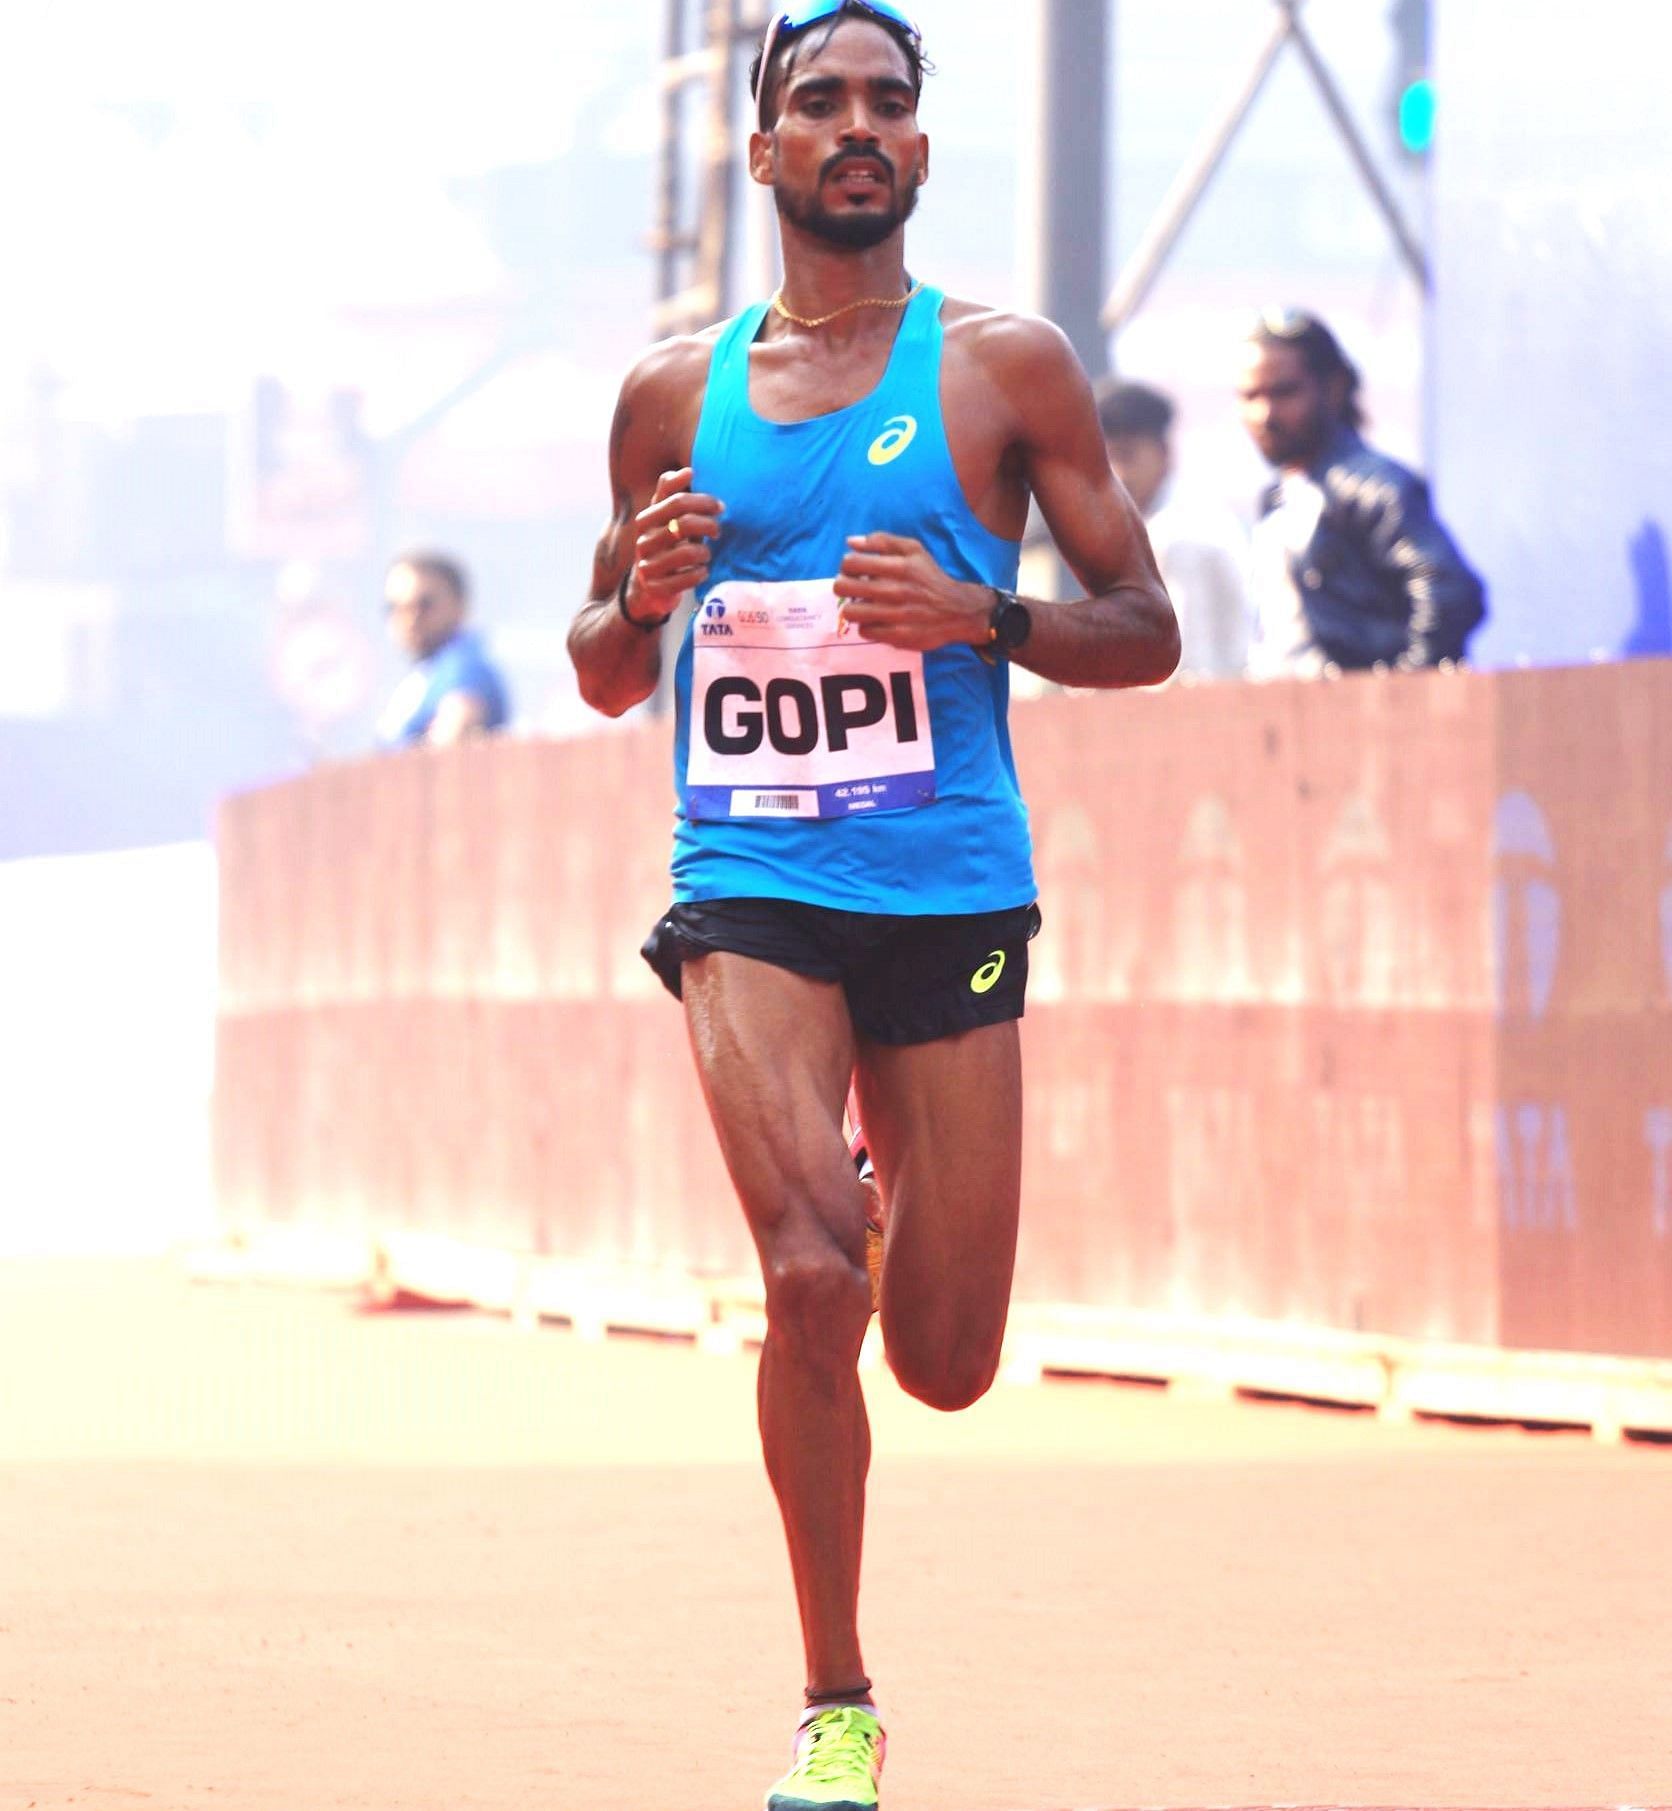 Thonakal Gopi in action during a road race. Photo credit Procam International